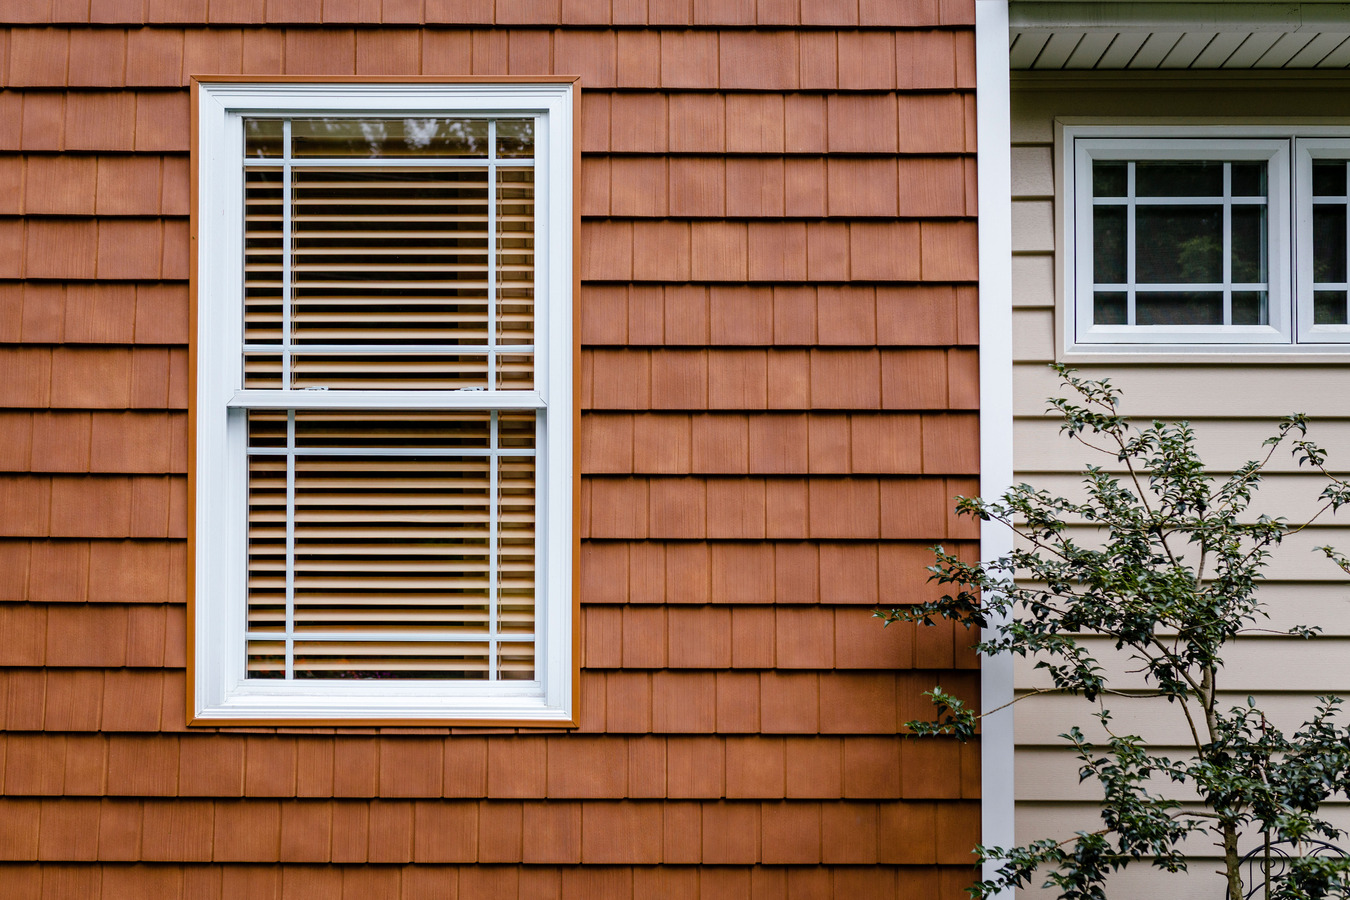 Home Maintenance Series: How To Fix Window Balance System